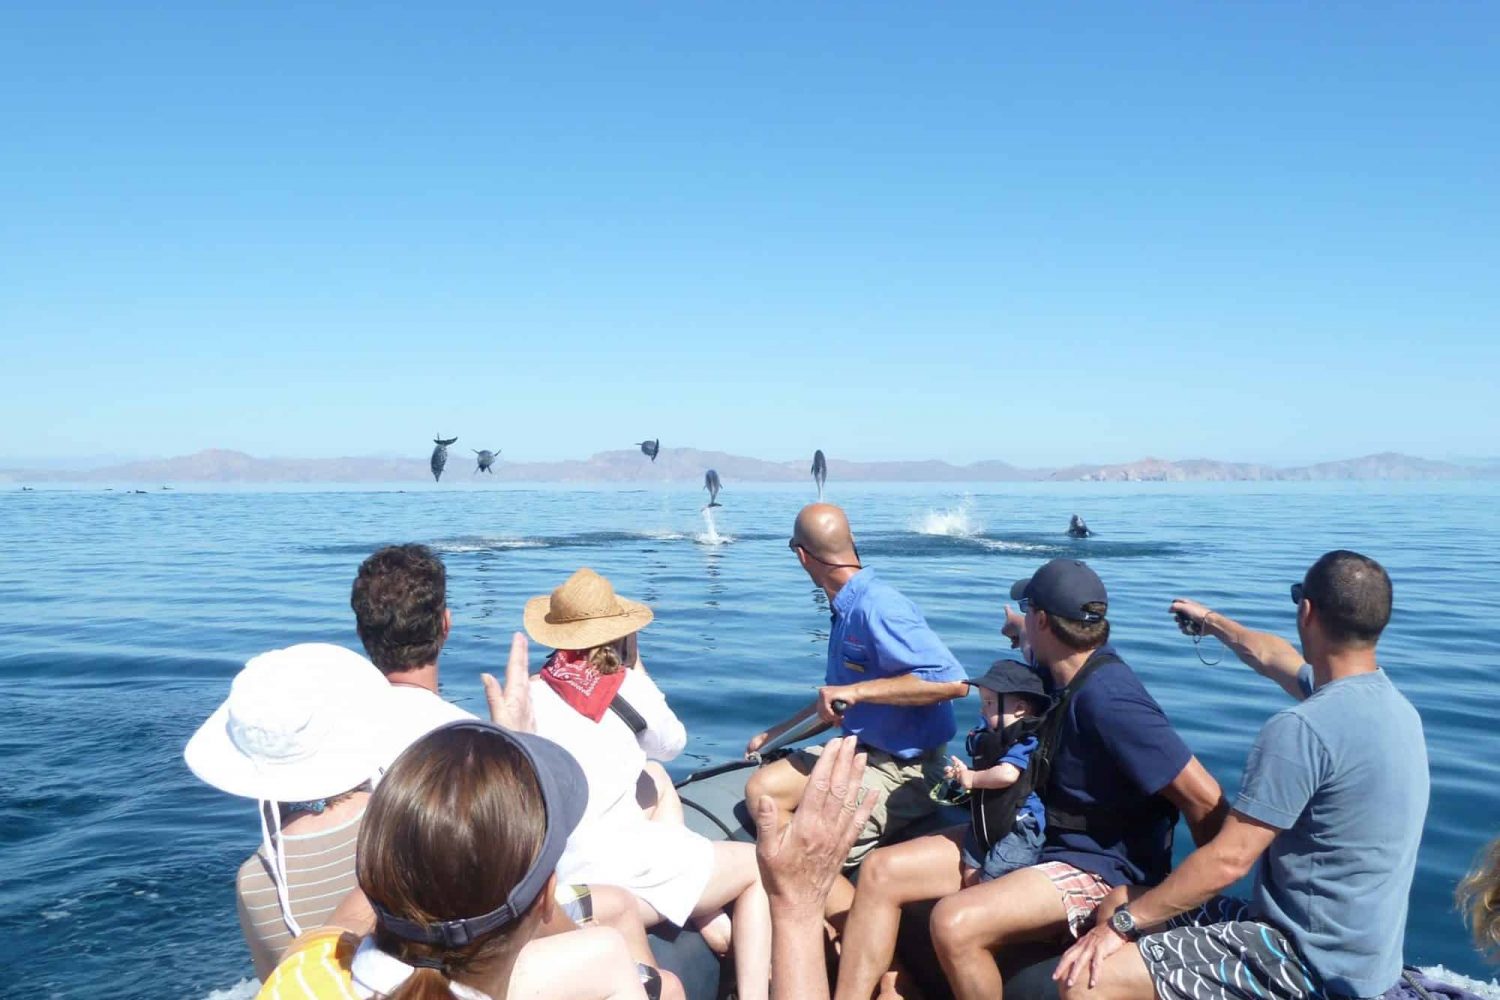 UnCruise in the Sea of Cortez - Dolphins from a skiff